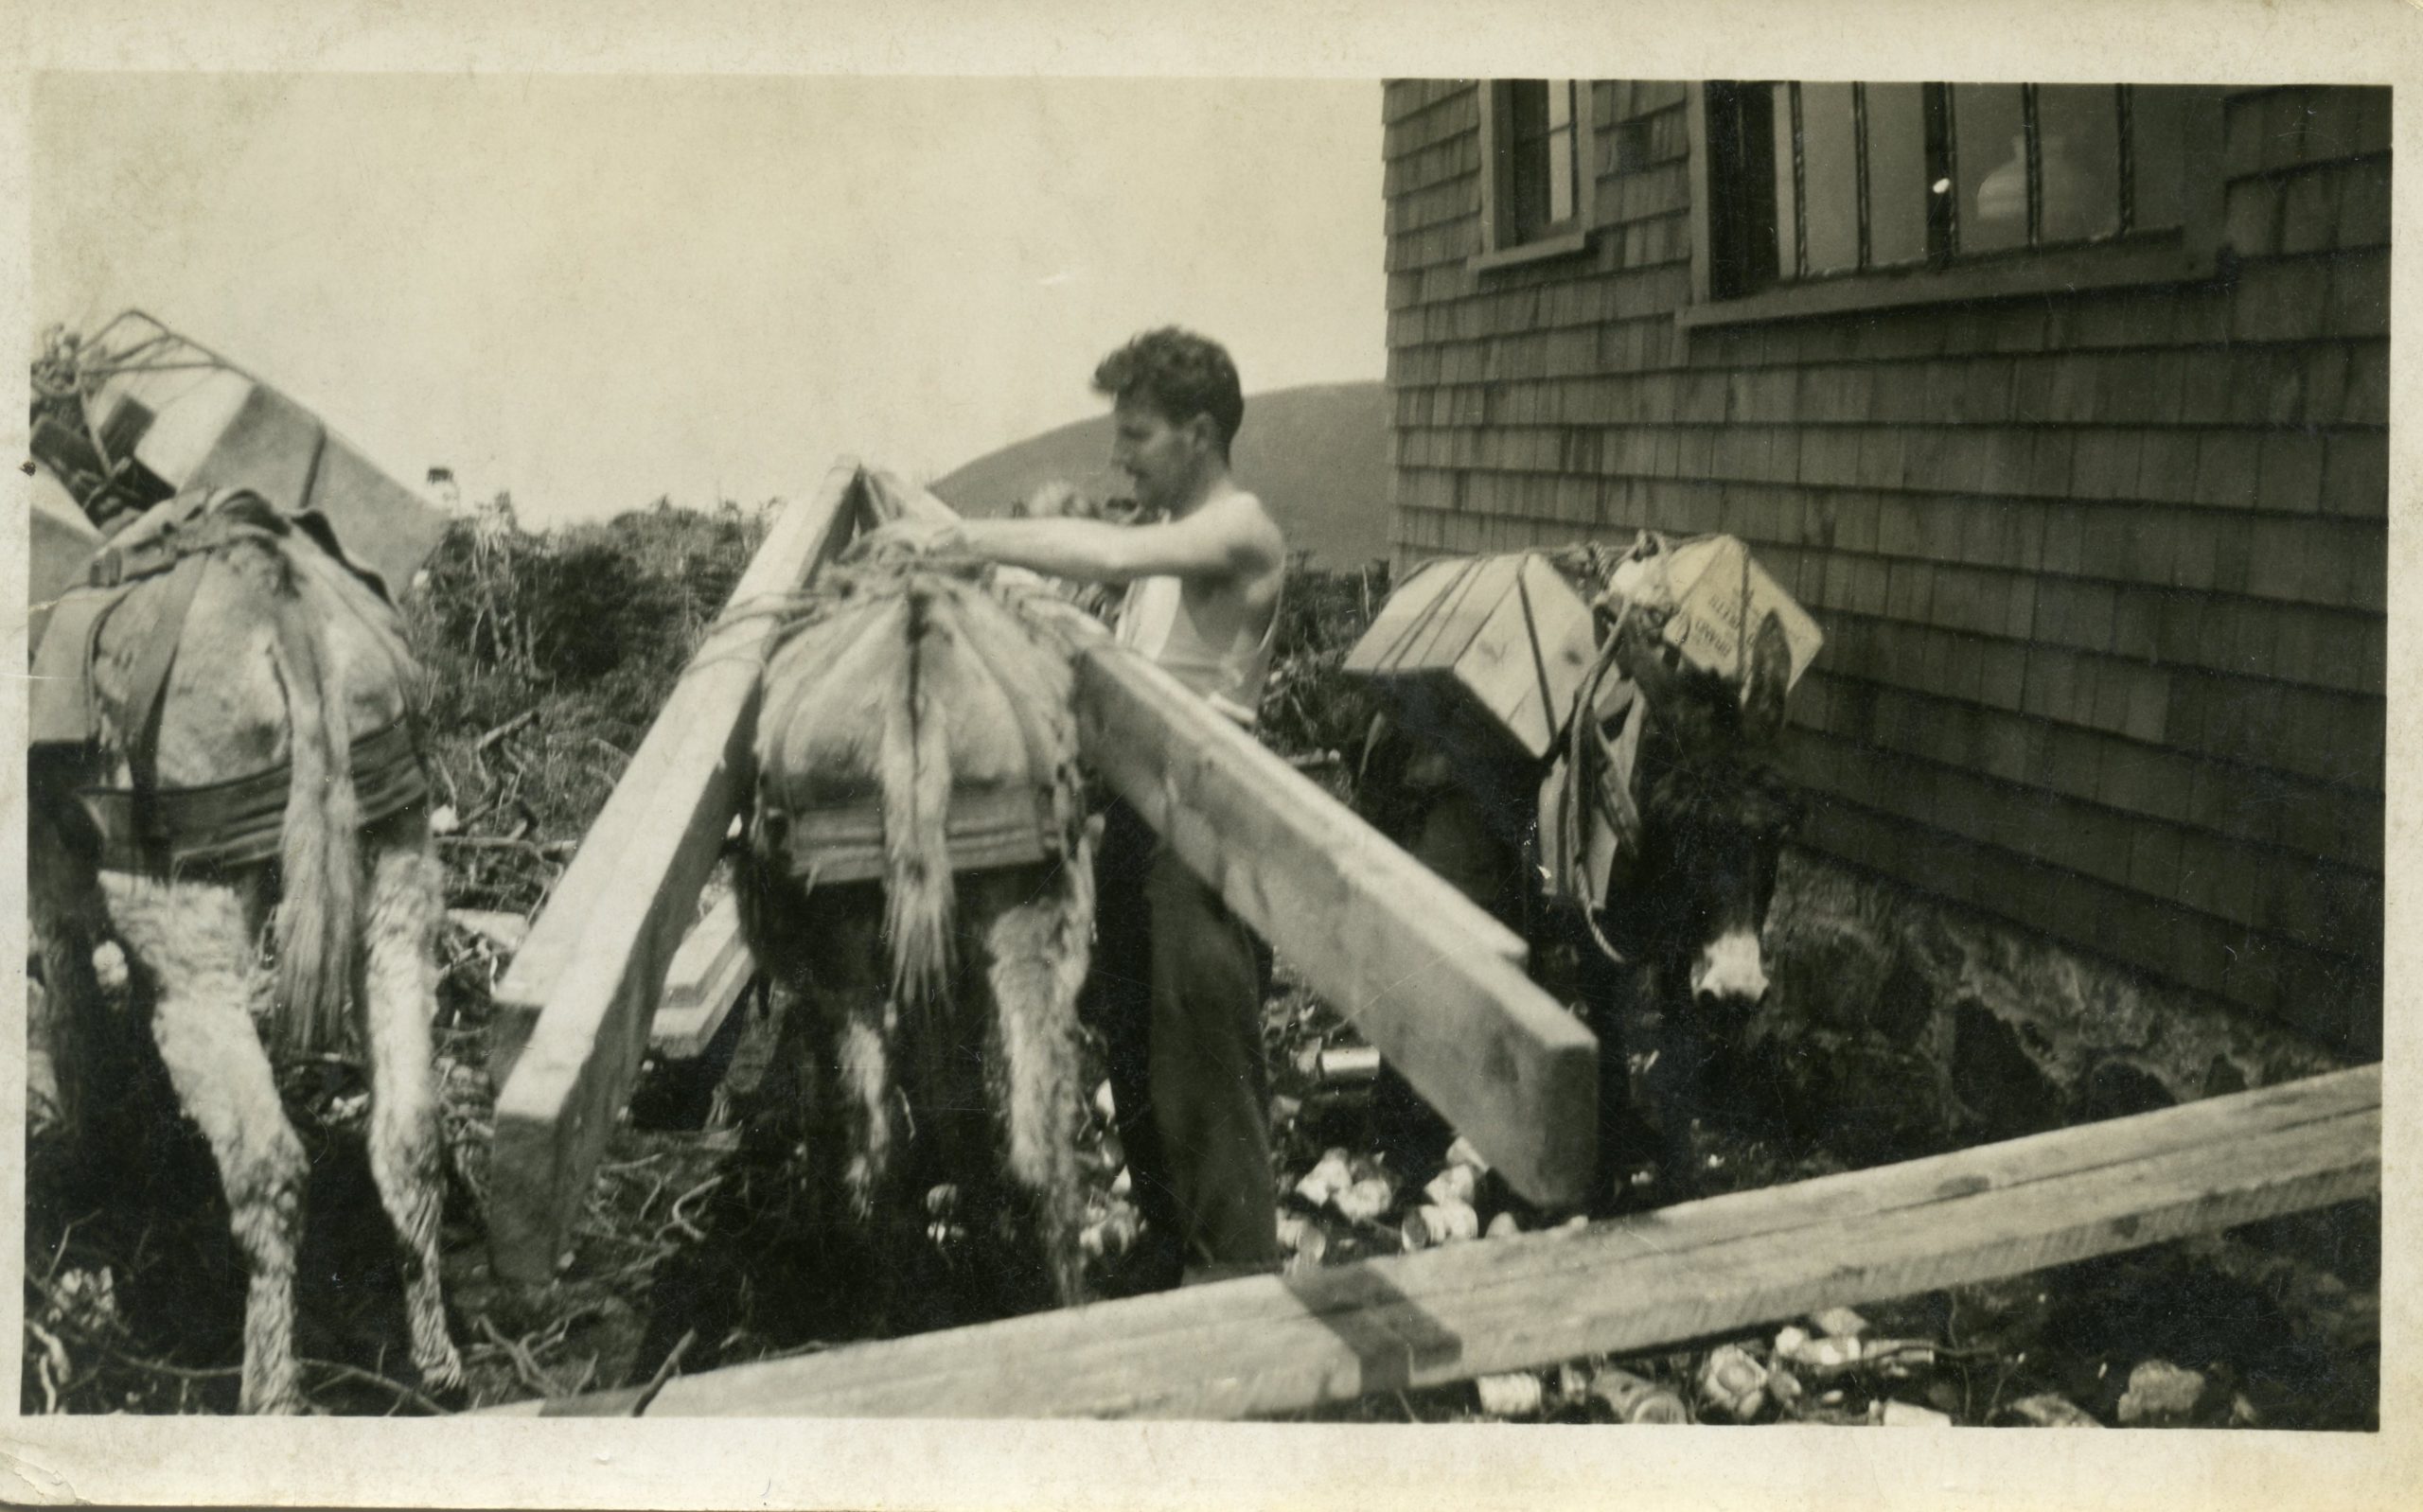 A trail worker unloads donkeys at Madison Spring Hut in 1940.